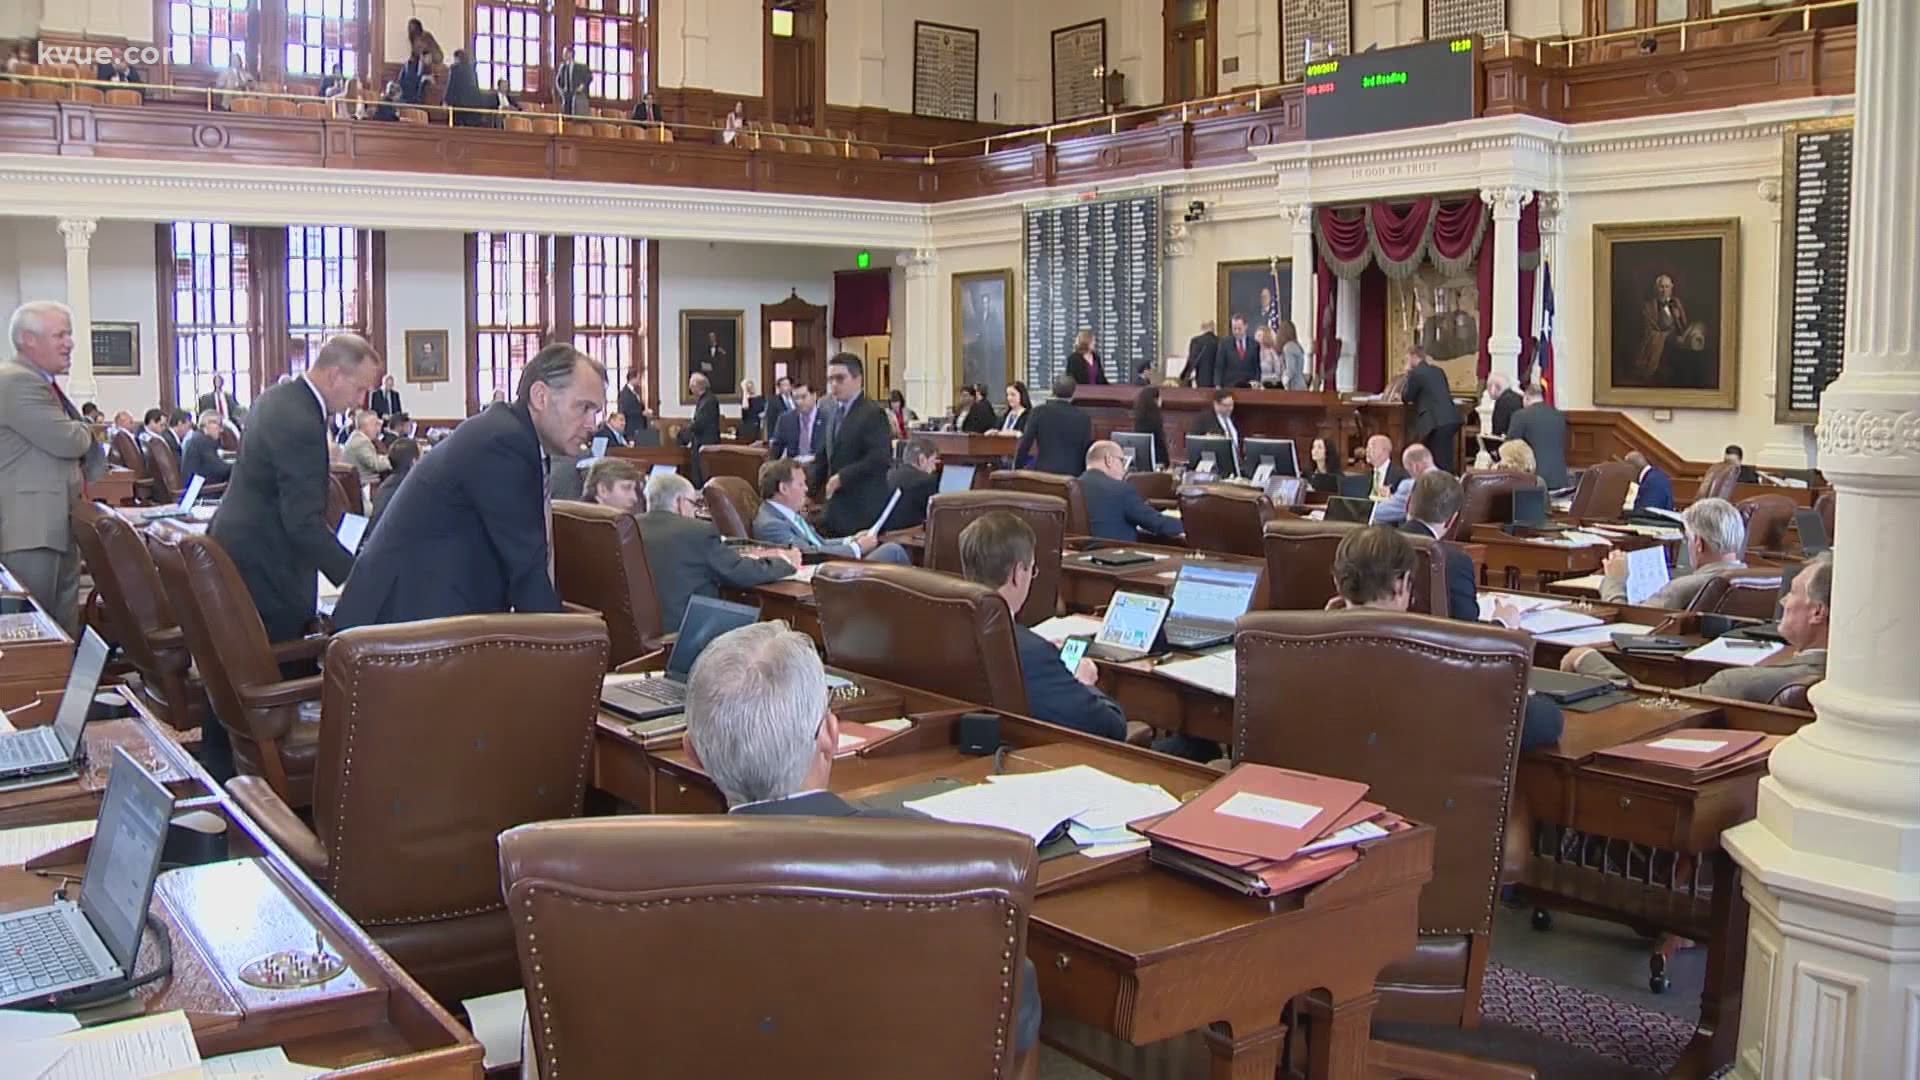 The next Texas Legislative Session is just around the corner, with lawmakers set to gavel in in January. But things may look different this time around.